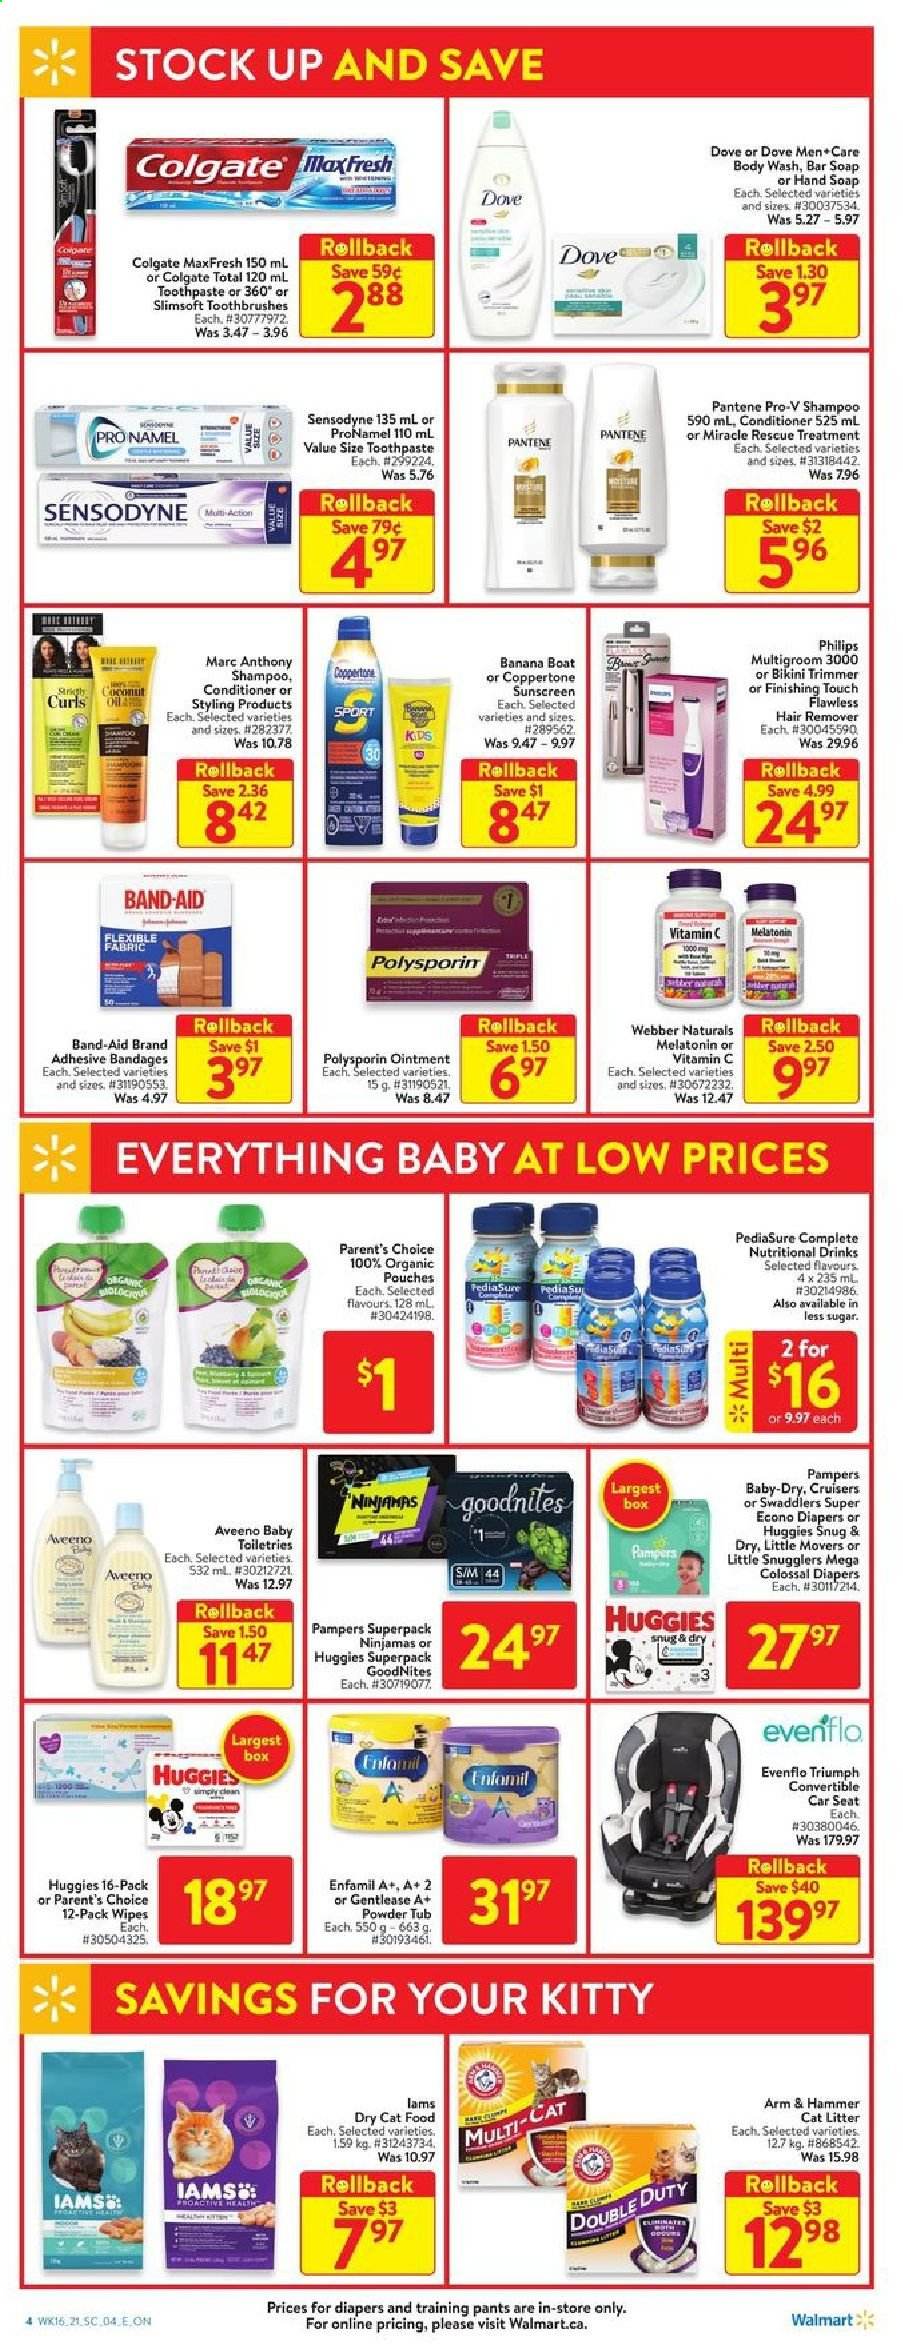 thumbnail - Walmart Flyer - May 13, 2021 - May 19, 2021 - Sales products - ARM & HAMMER, Enfamil, wipes, pants, nappies, baby pants, Aveeno, ointment, body wash, hand soap, soap bar, soap, toothpaste, conditioner, trimmer, cat litter, animal food, cat food, dry cat food, Iams, Snug, boat, baby car seat, Melatonin, vitamin c, shampoo, Huggies, Pampers, Pantene, Sensodyne. Page 7.